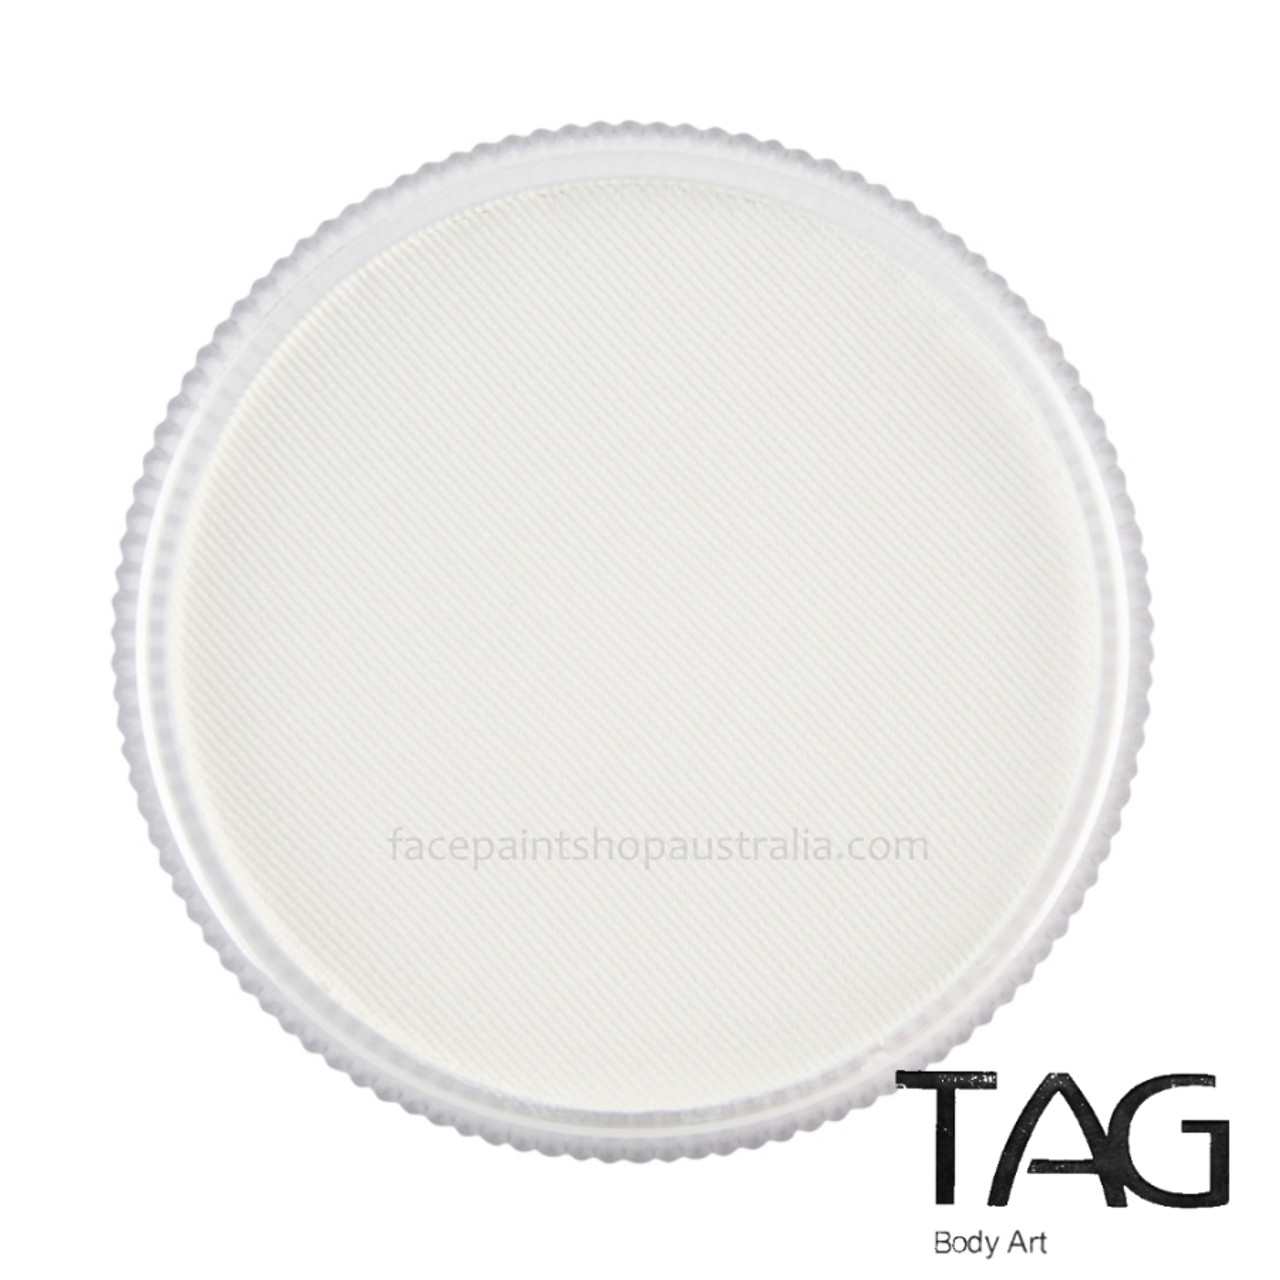 White Face And Body Paint 32G By Tag Body Art - Face Paint Shop Australia